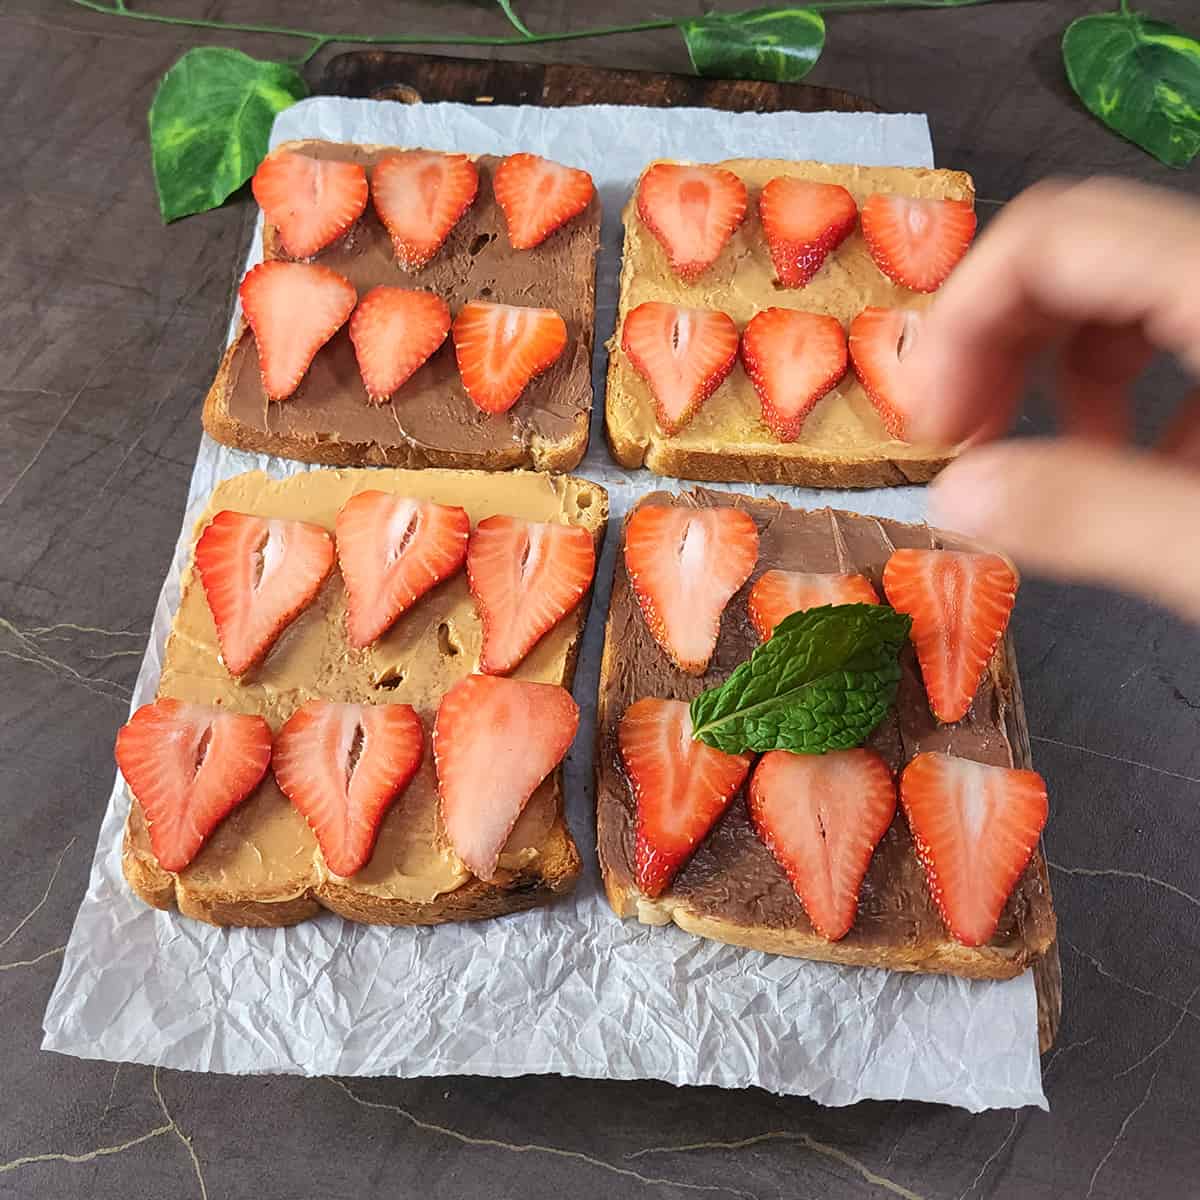 Garnish strawberry nutella bread toast with fresh mint leaves.